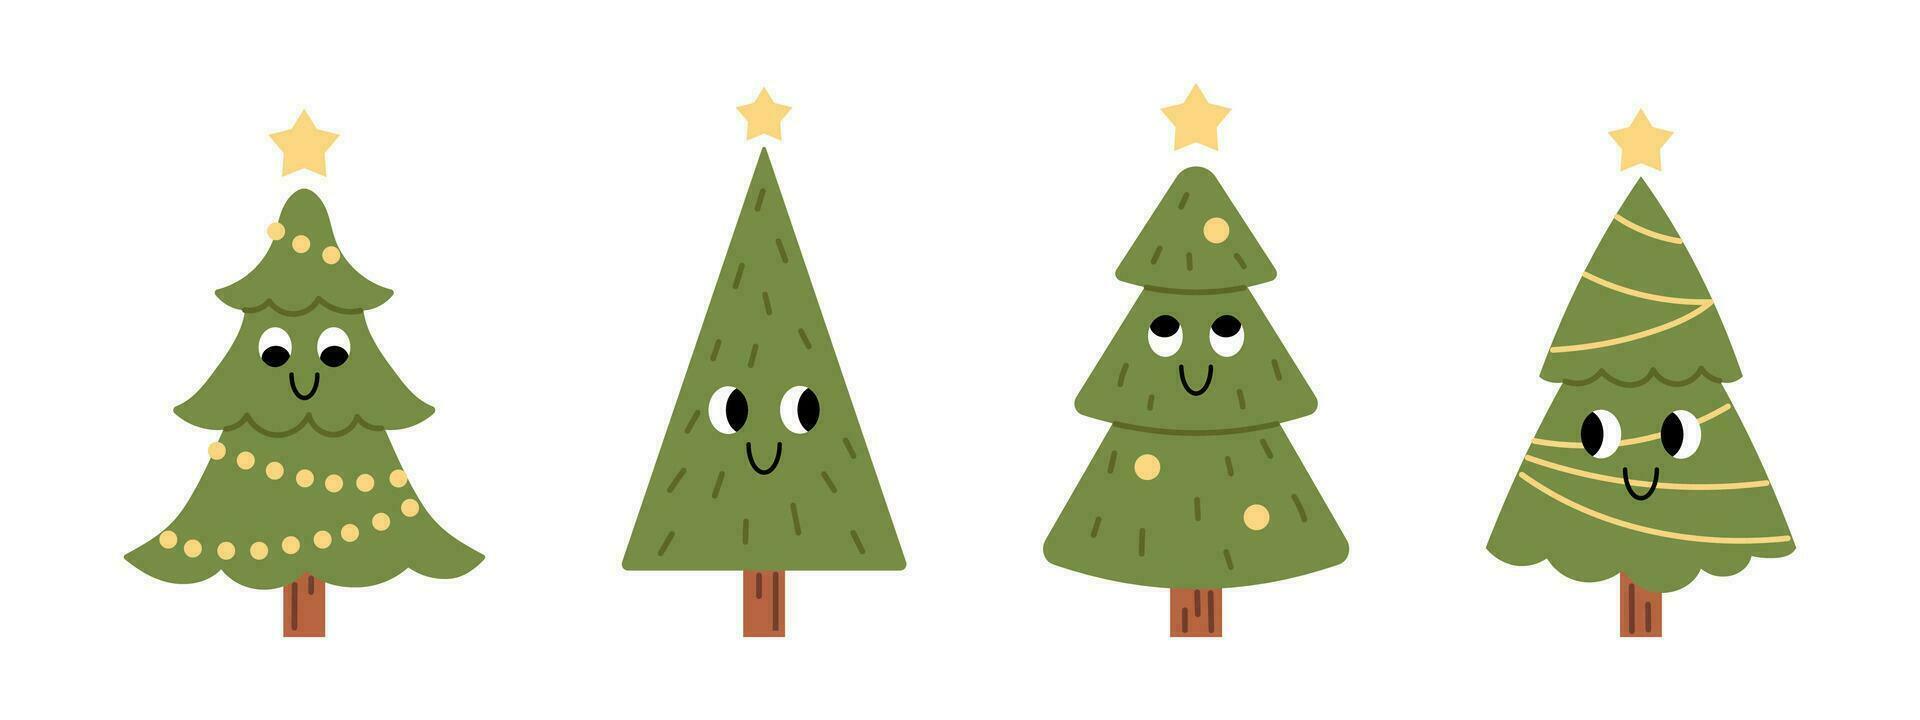 Vector set of different cute smiling christmas trees. Funny childish fir trees with garlands and balls. New Year and Christmas celebration. Collection of christmas trees with faces in flat design.